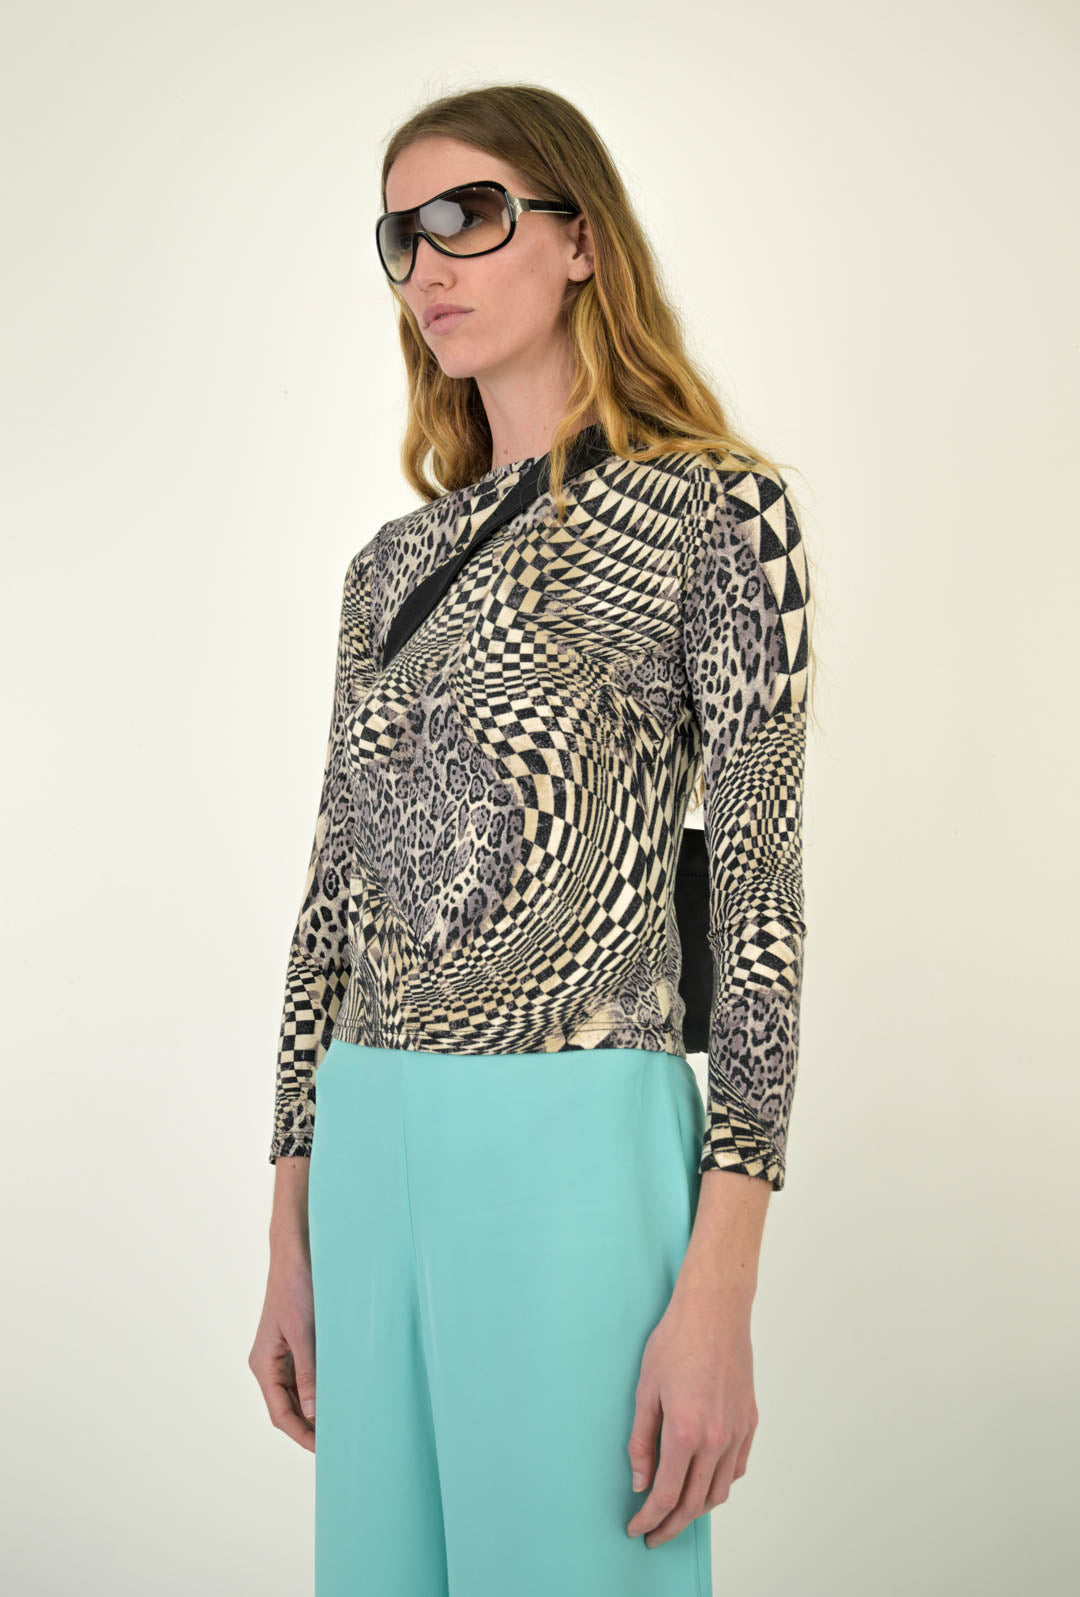 Abstract Illusion Top